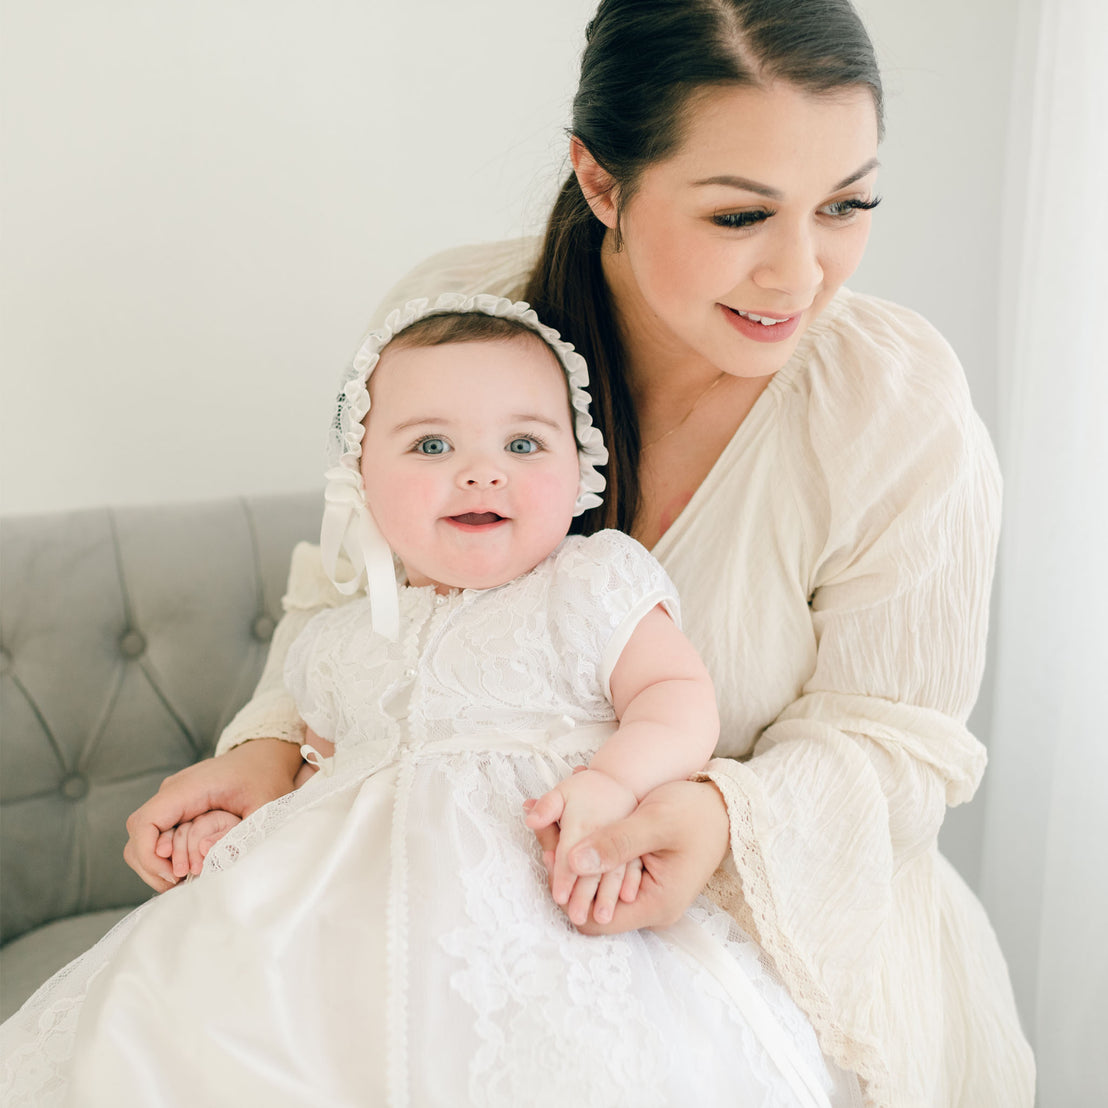 A mother in a white dress smiles gently while holding her baby, who is dressed in an Aria Christening Gown & Bonnet, in a bright and elegantly decorated room.